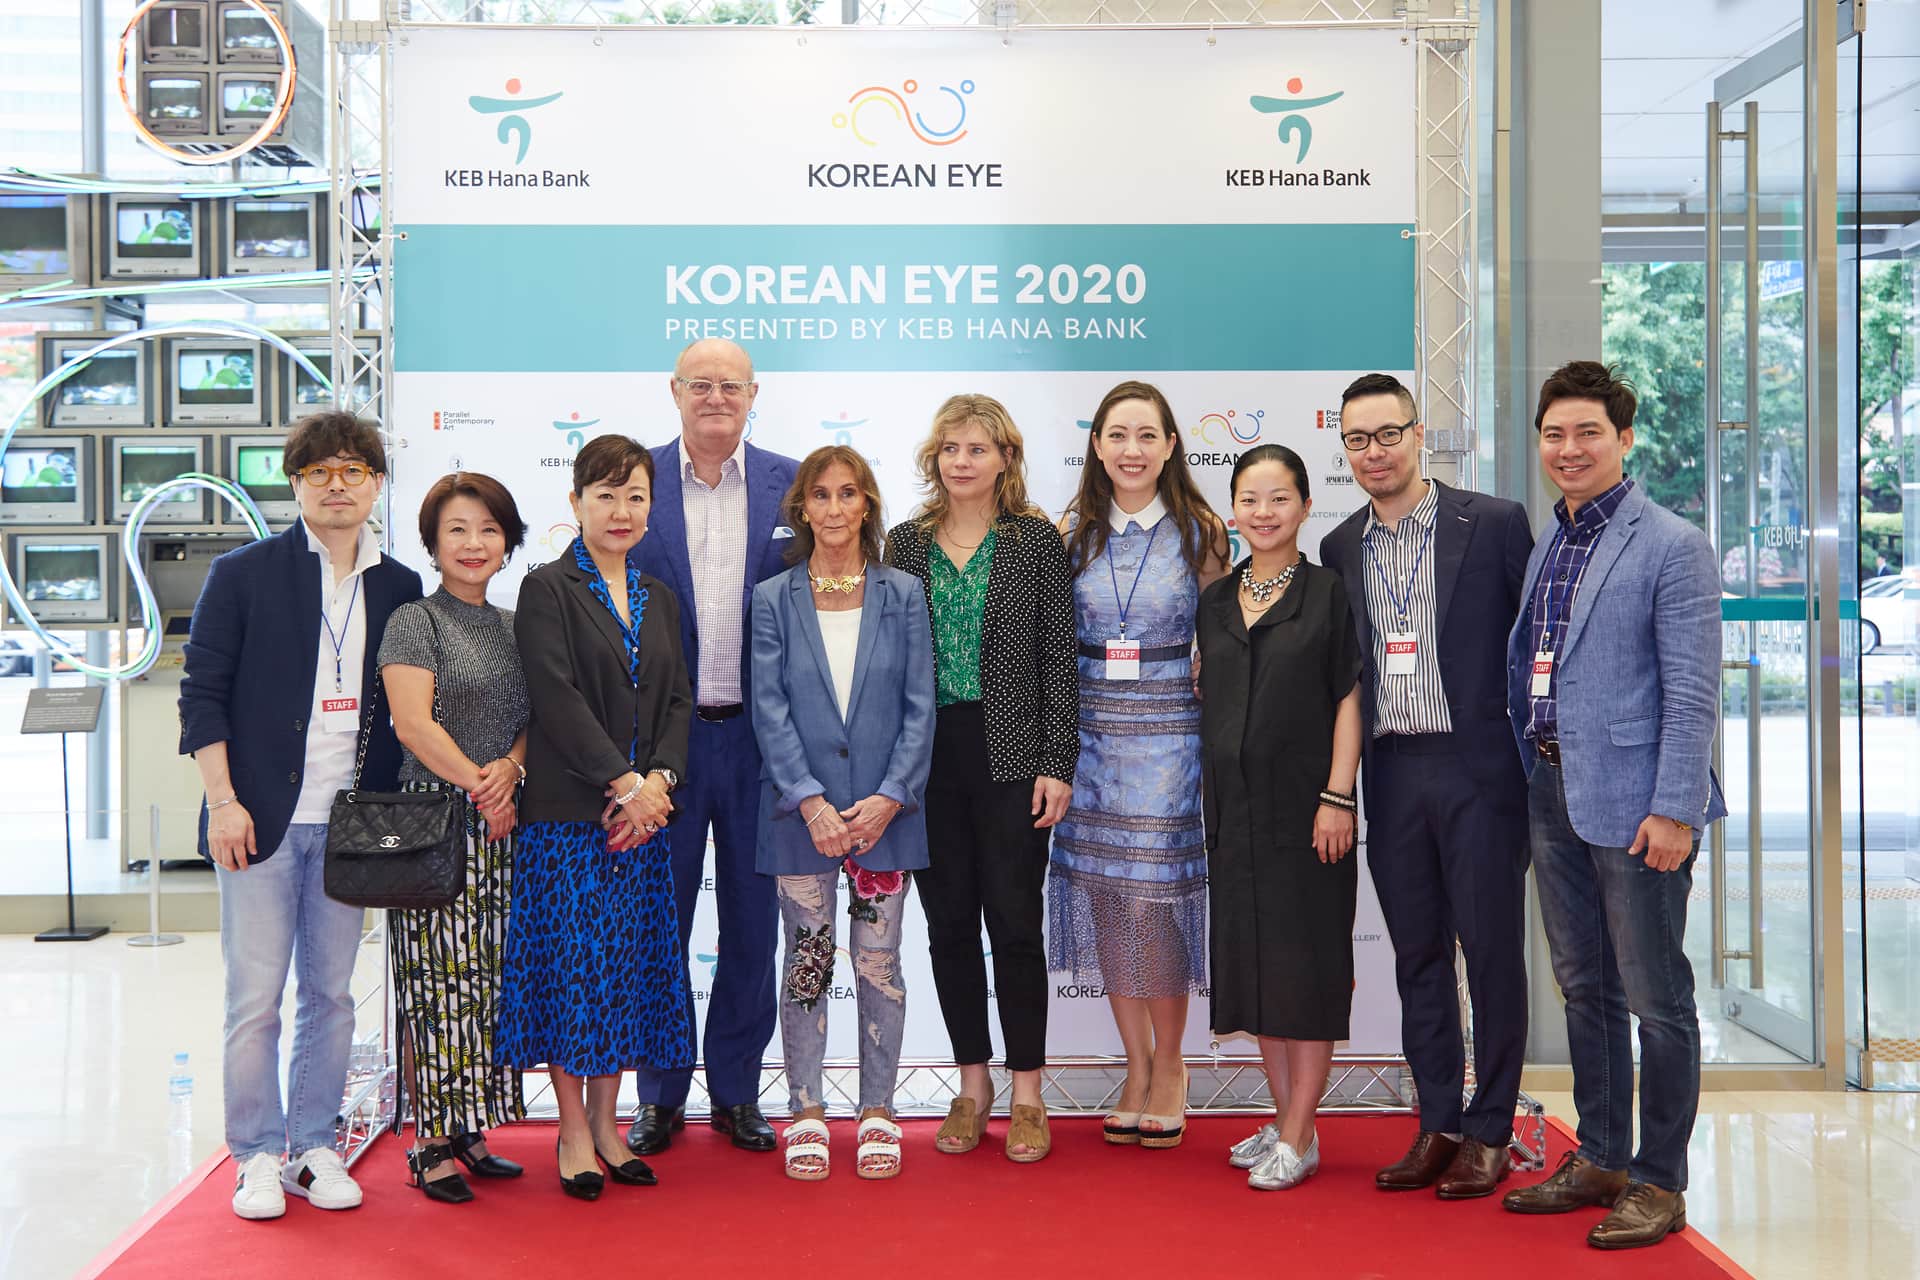 The Korean Eye 2020 team at the launch in Seoul